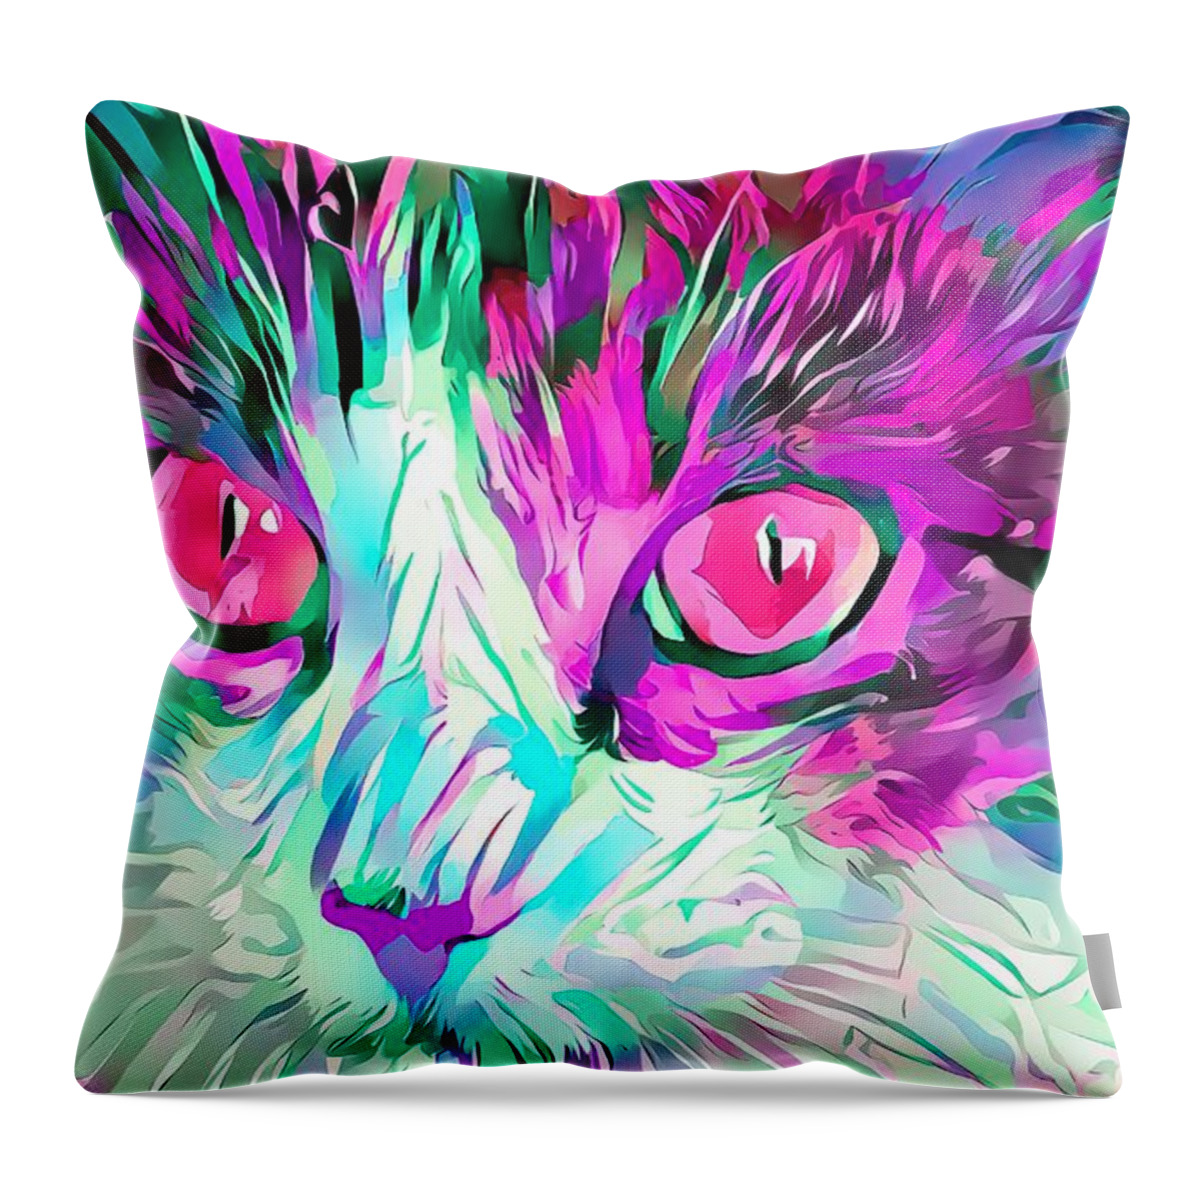 Pink Throw Pillow featuring the digital art Kitty Love Pink Eyes by Don Northup